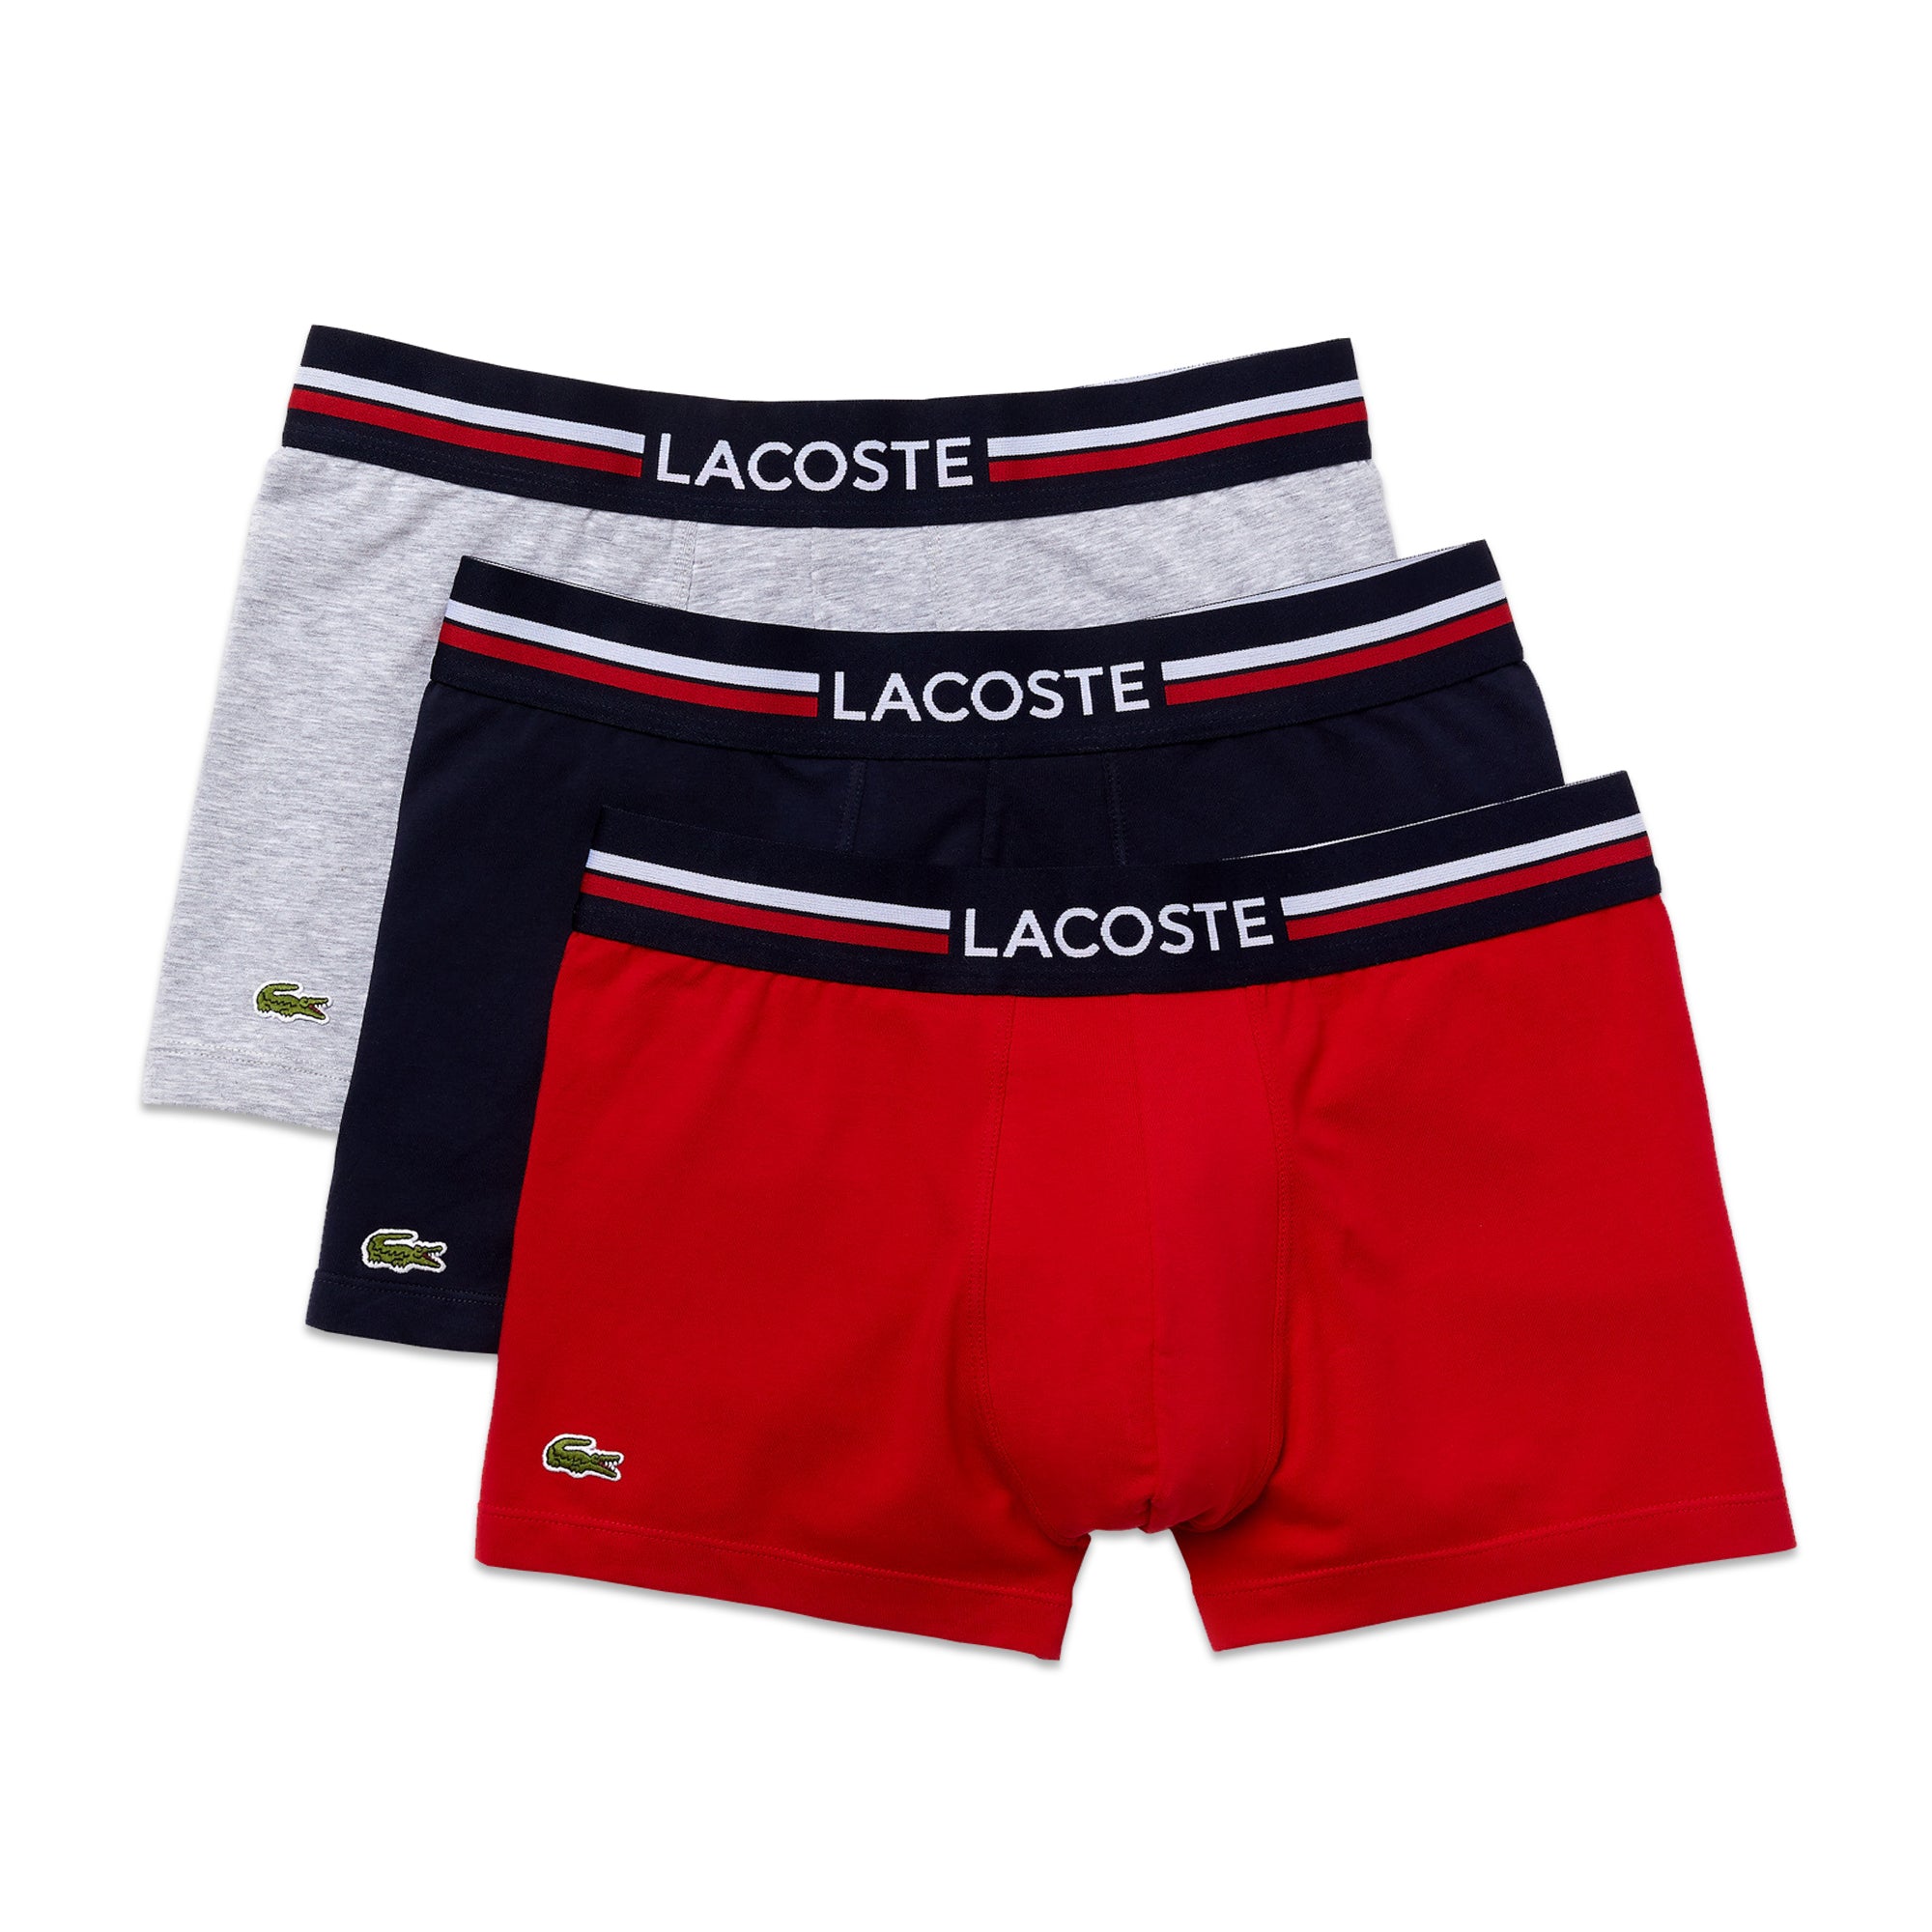 Lacoste 3 Pack Cotton Stretch Trunks - Grey/Red/Navy Striped Band